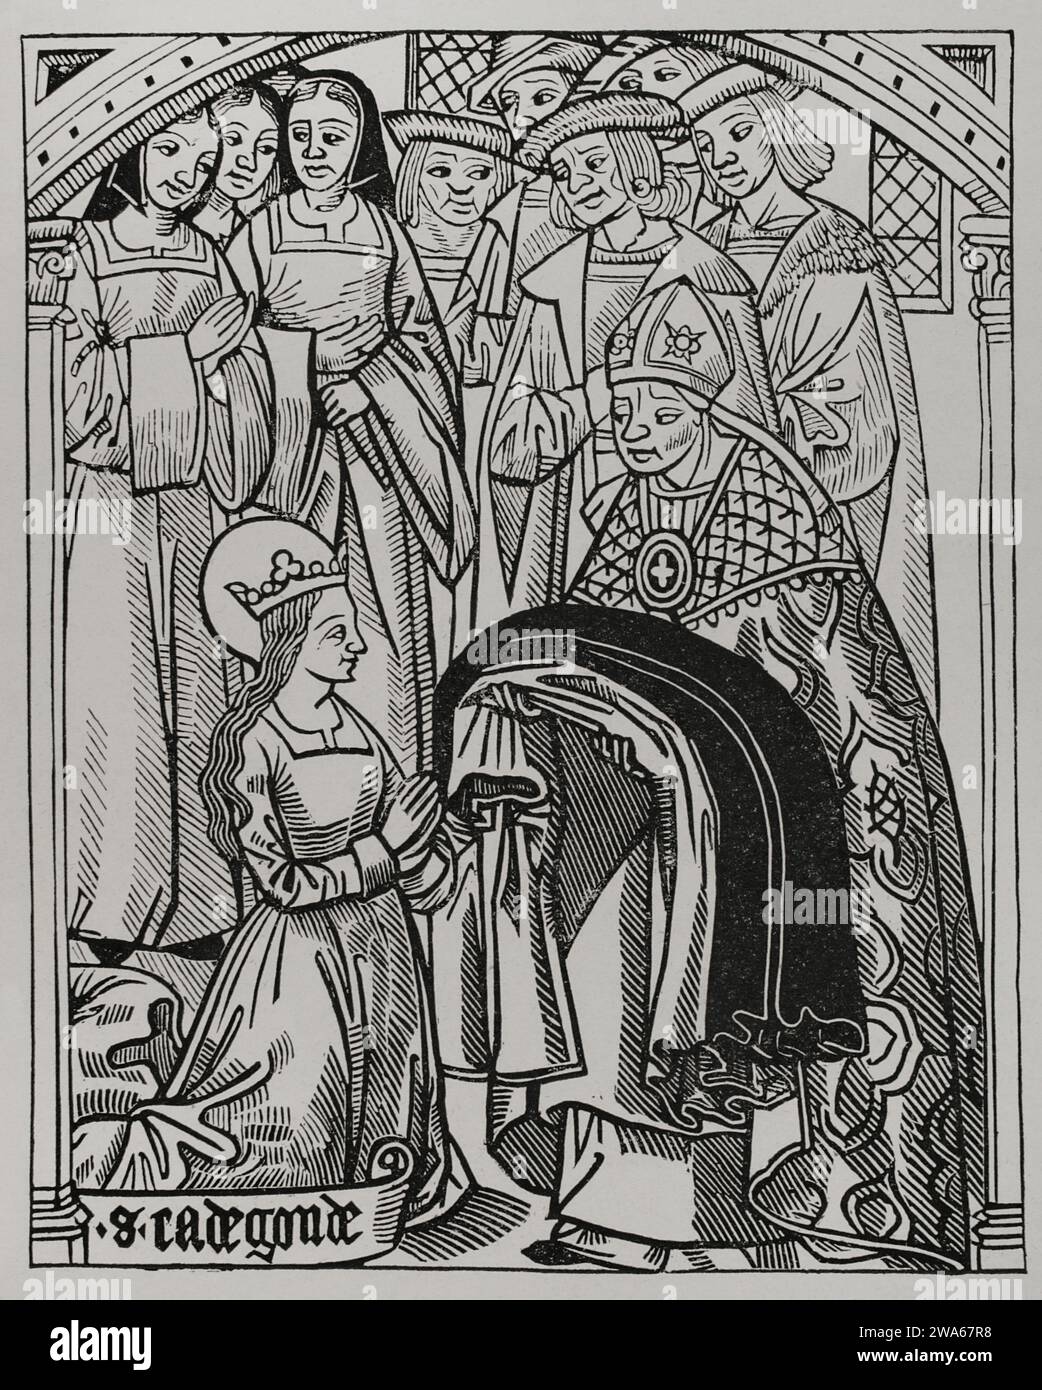 Saint Radegund (ca. 520-587). Princess of Thuringia and queen of the Franks by her marriage to Clothar I (498-561). Radegund receiving the habit and being consecrated a deaconess by Medard (456-545), bishop of Noyon, when she left her husband King Clothar in order to enter the religious life. Facsimile after an engraving from 'The History and Chronicle of Clotaire', 1513. 'Vie Militaire et Religieuse au Moyen Age et a l'Epoque de la Renaissance'. Paris, 1877. Stock Photo